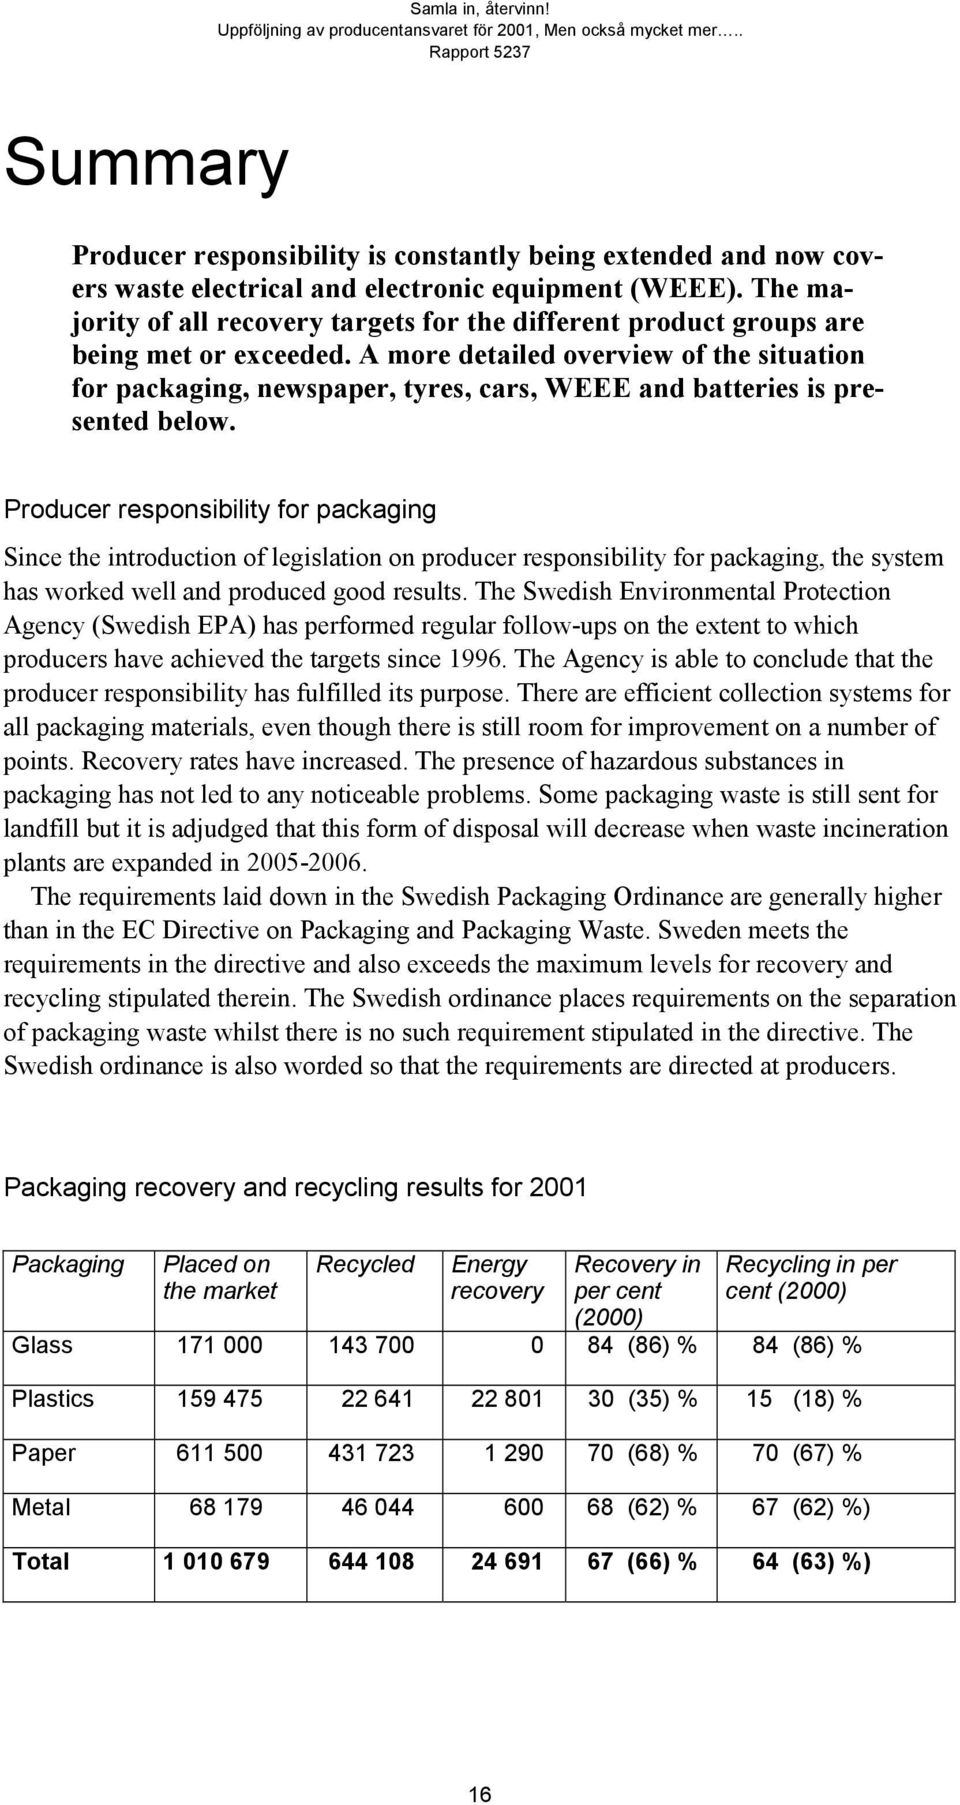 A more detailed overview of the situation for packaging, newspaper, tyres, cars, WEEE and batteries is presented below.